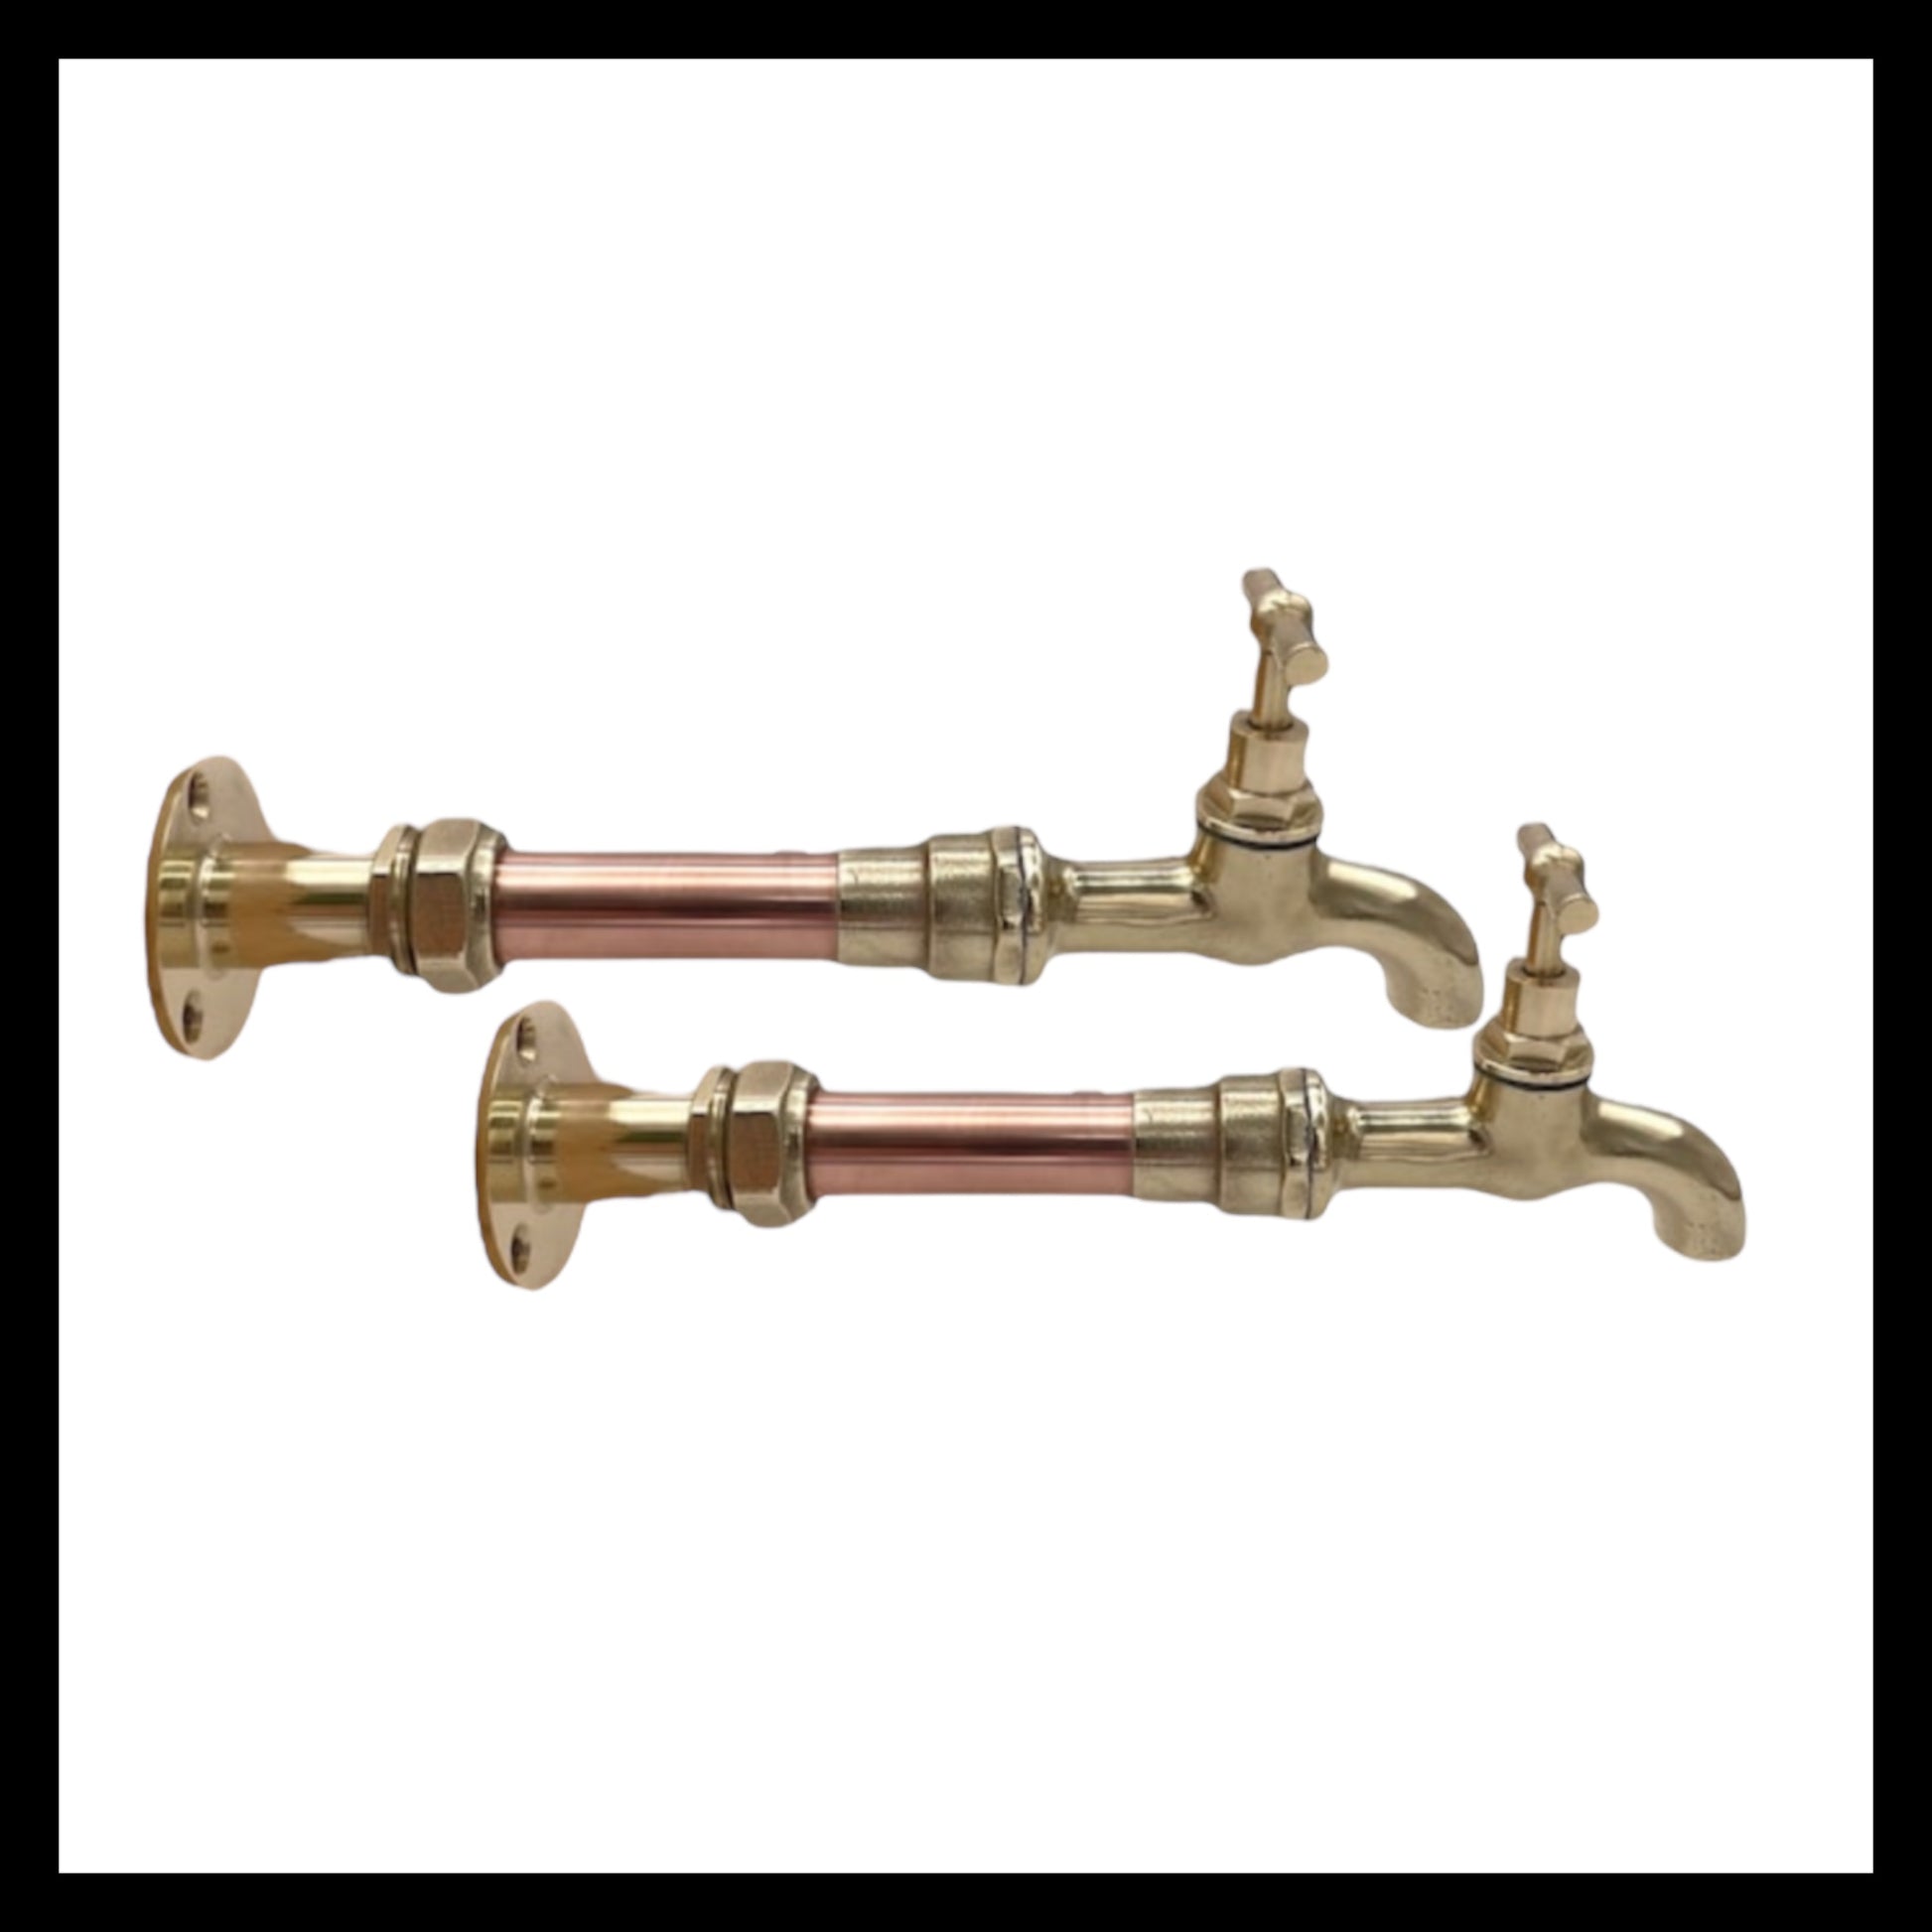 Copper and brass wall mounted handmade taps sold by All Things French Store